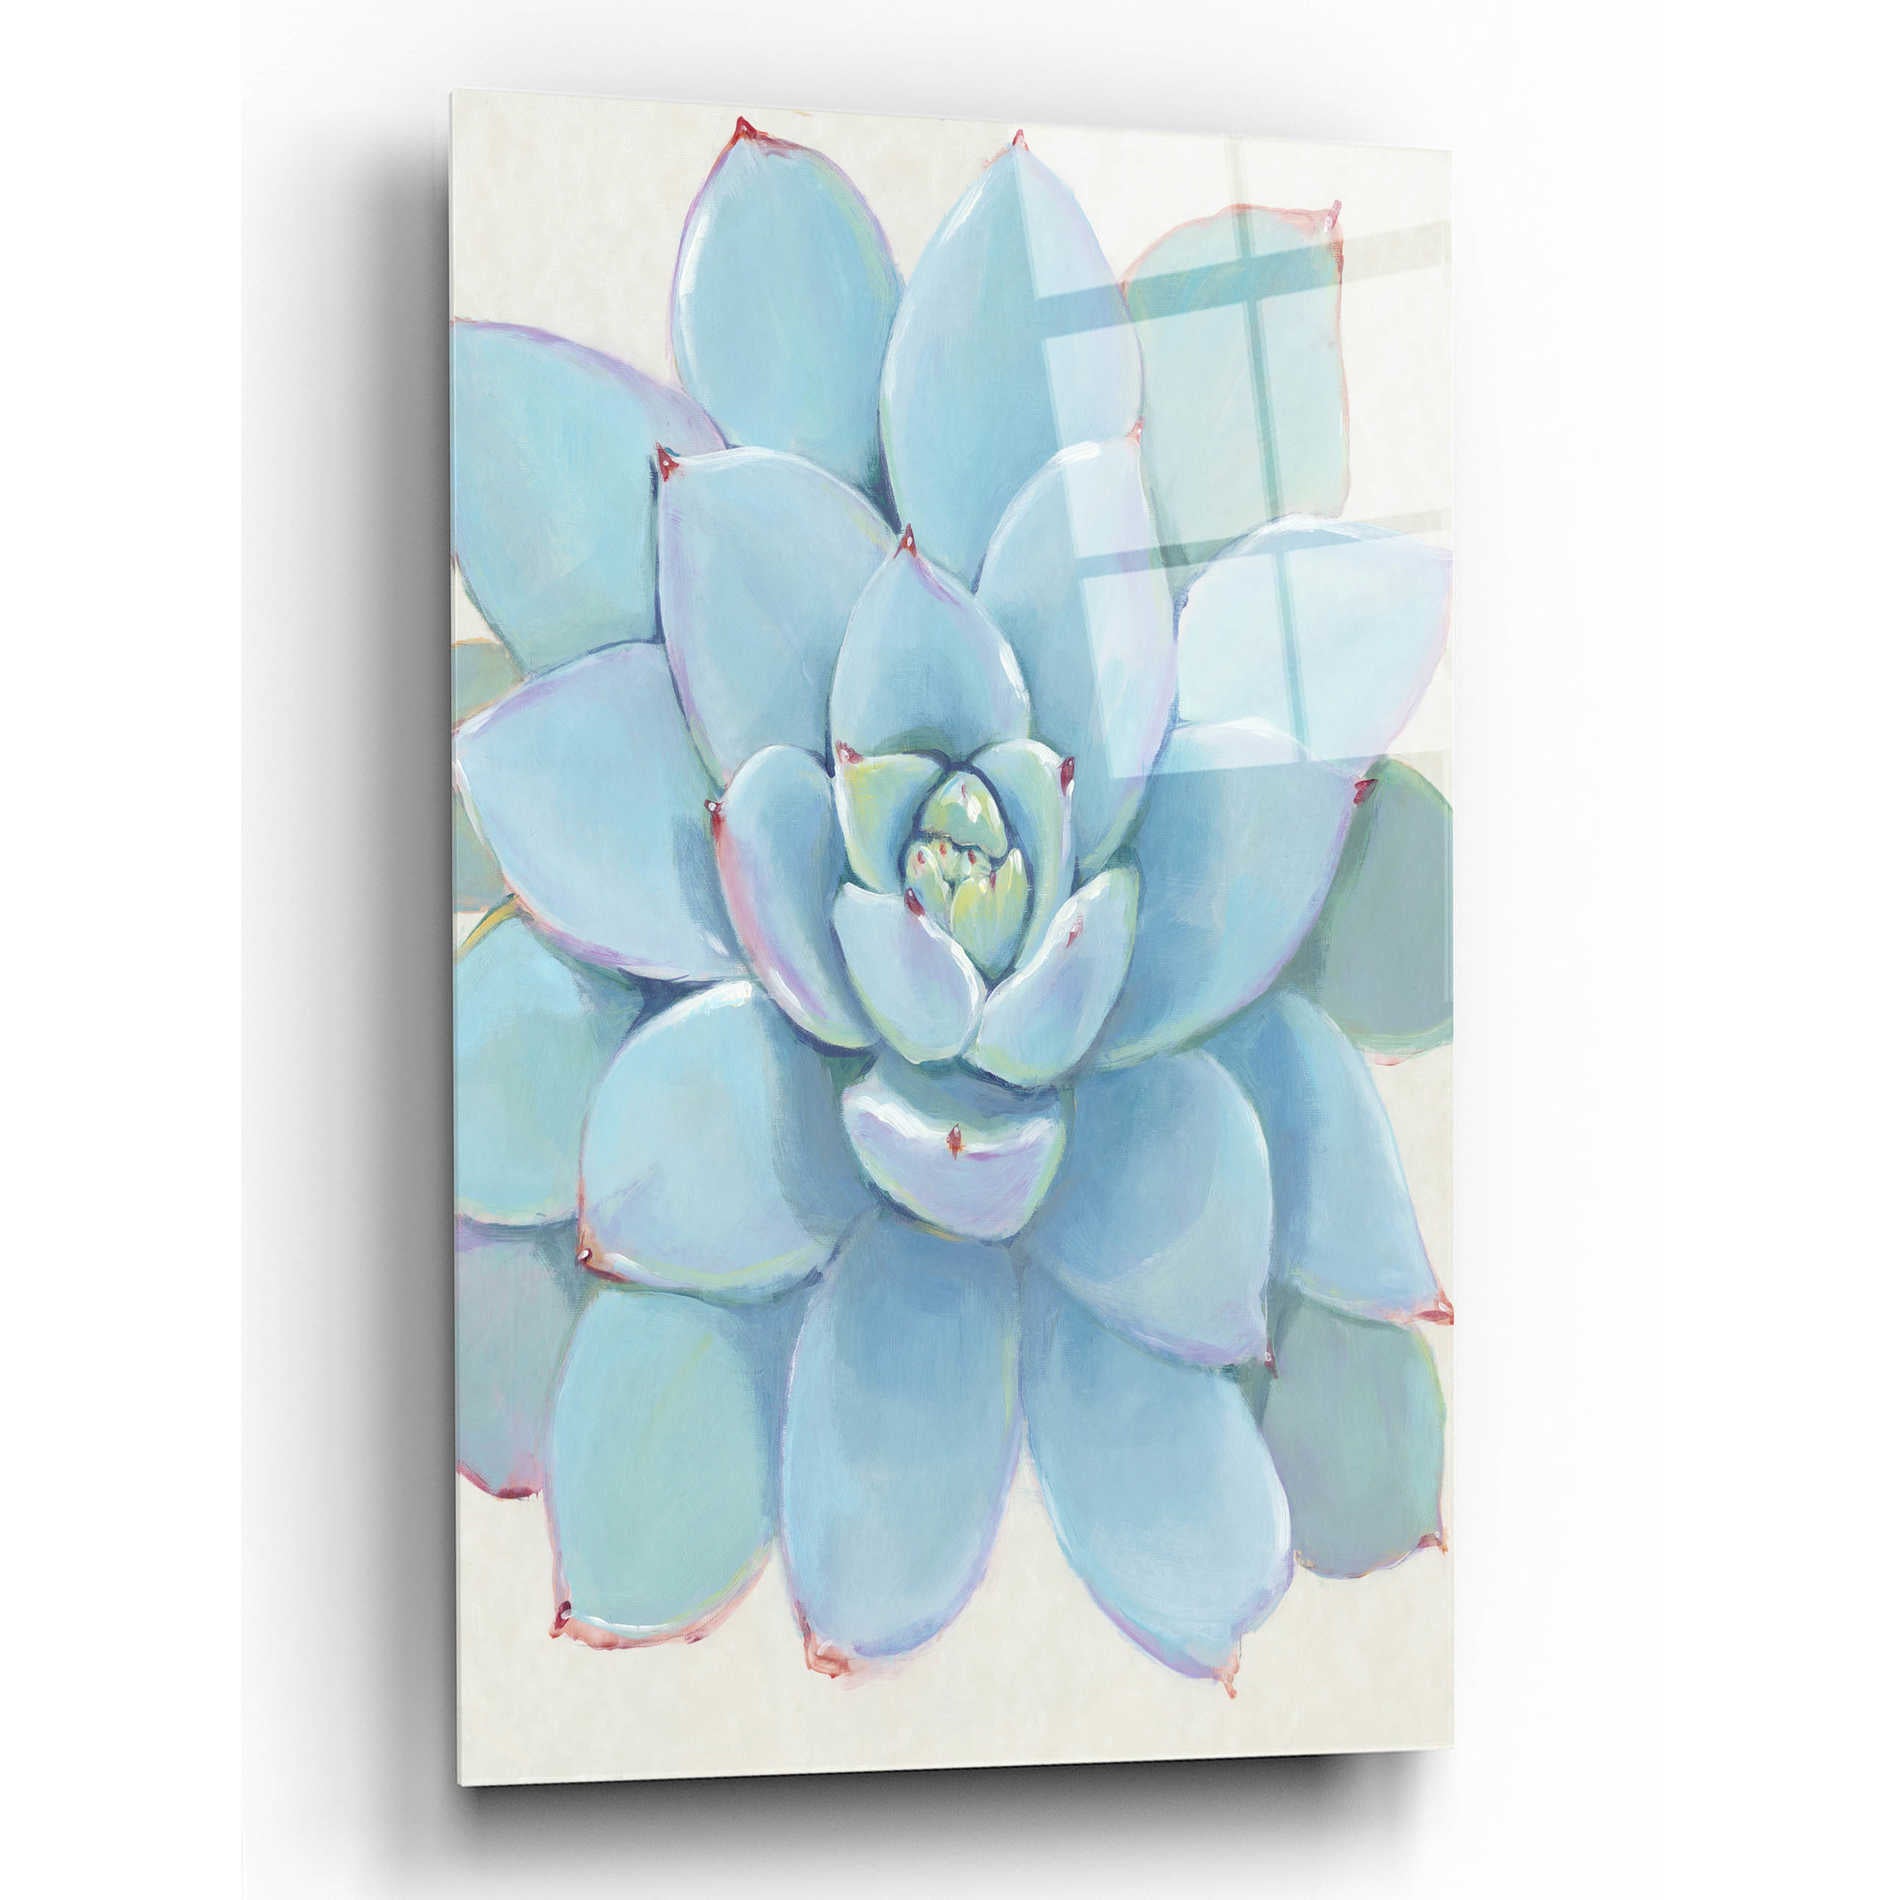 Epic Art 'Pastel Succulent I' by Tim O'Toole, Acrylic Glass Wall Art,12x16